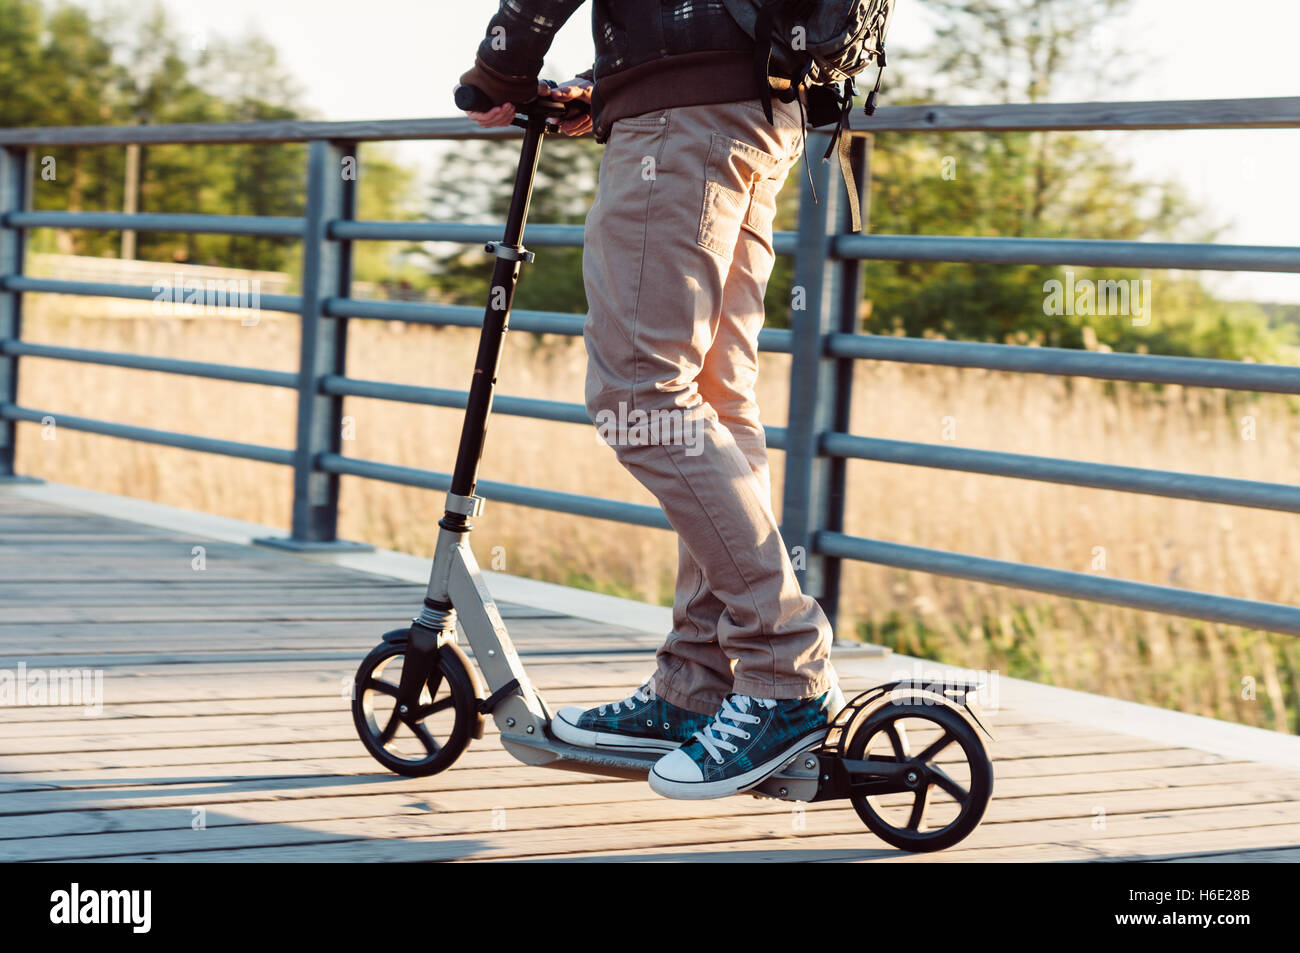 Young man in casual wear on kick scooter in park at sunset Stock Photo